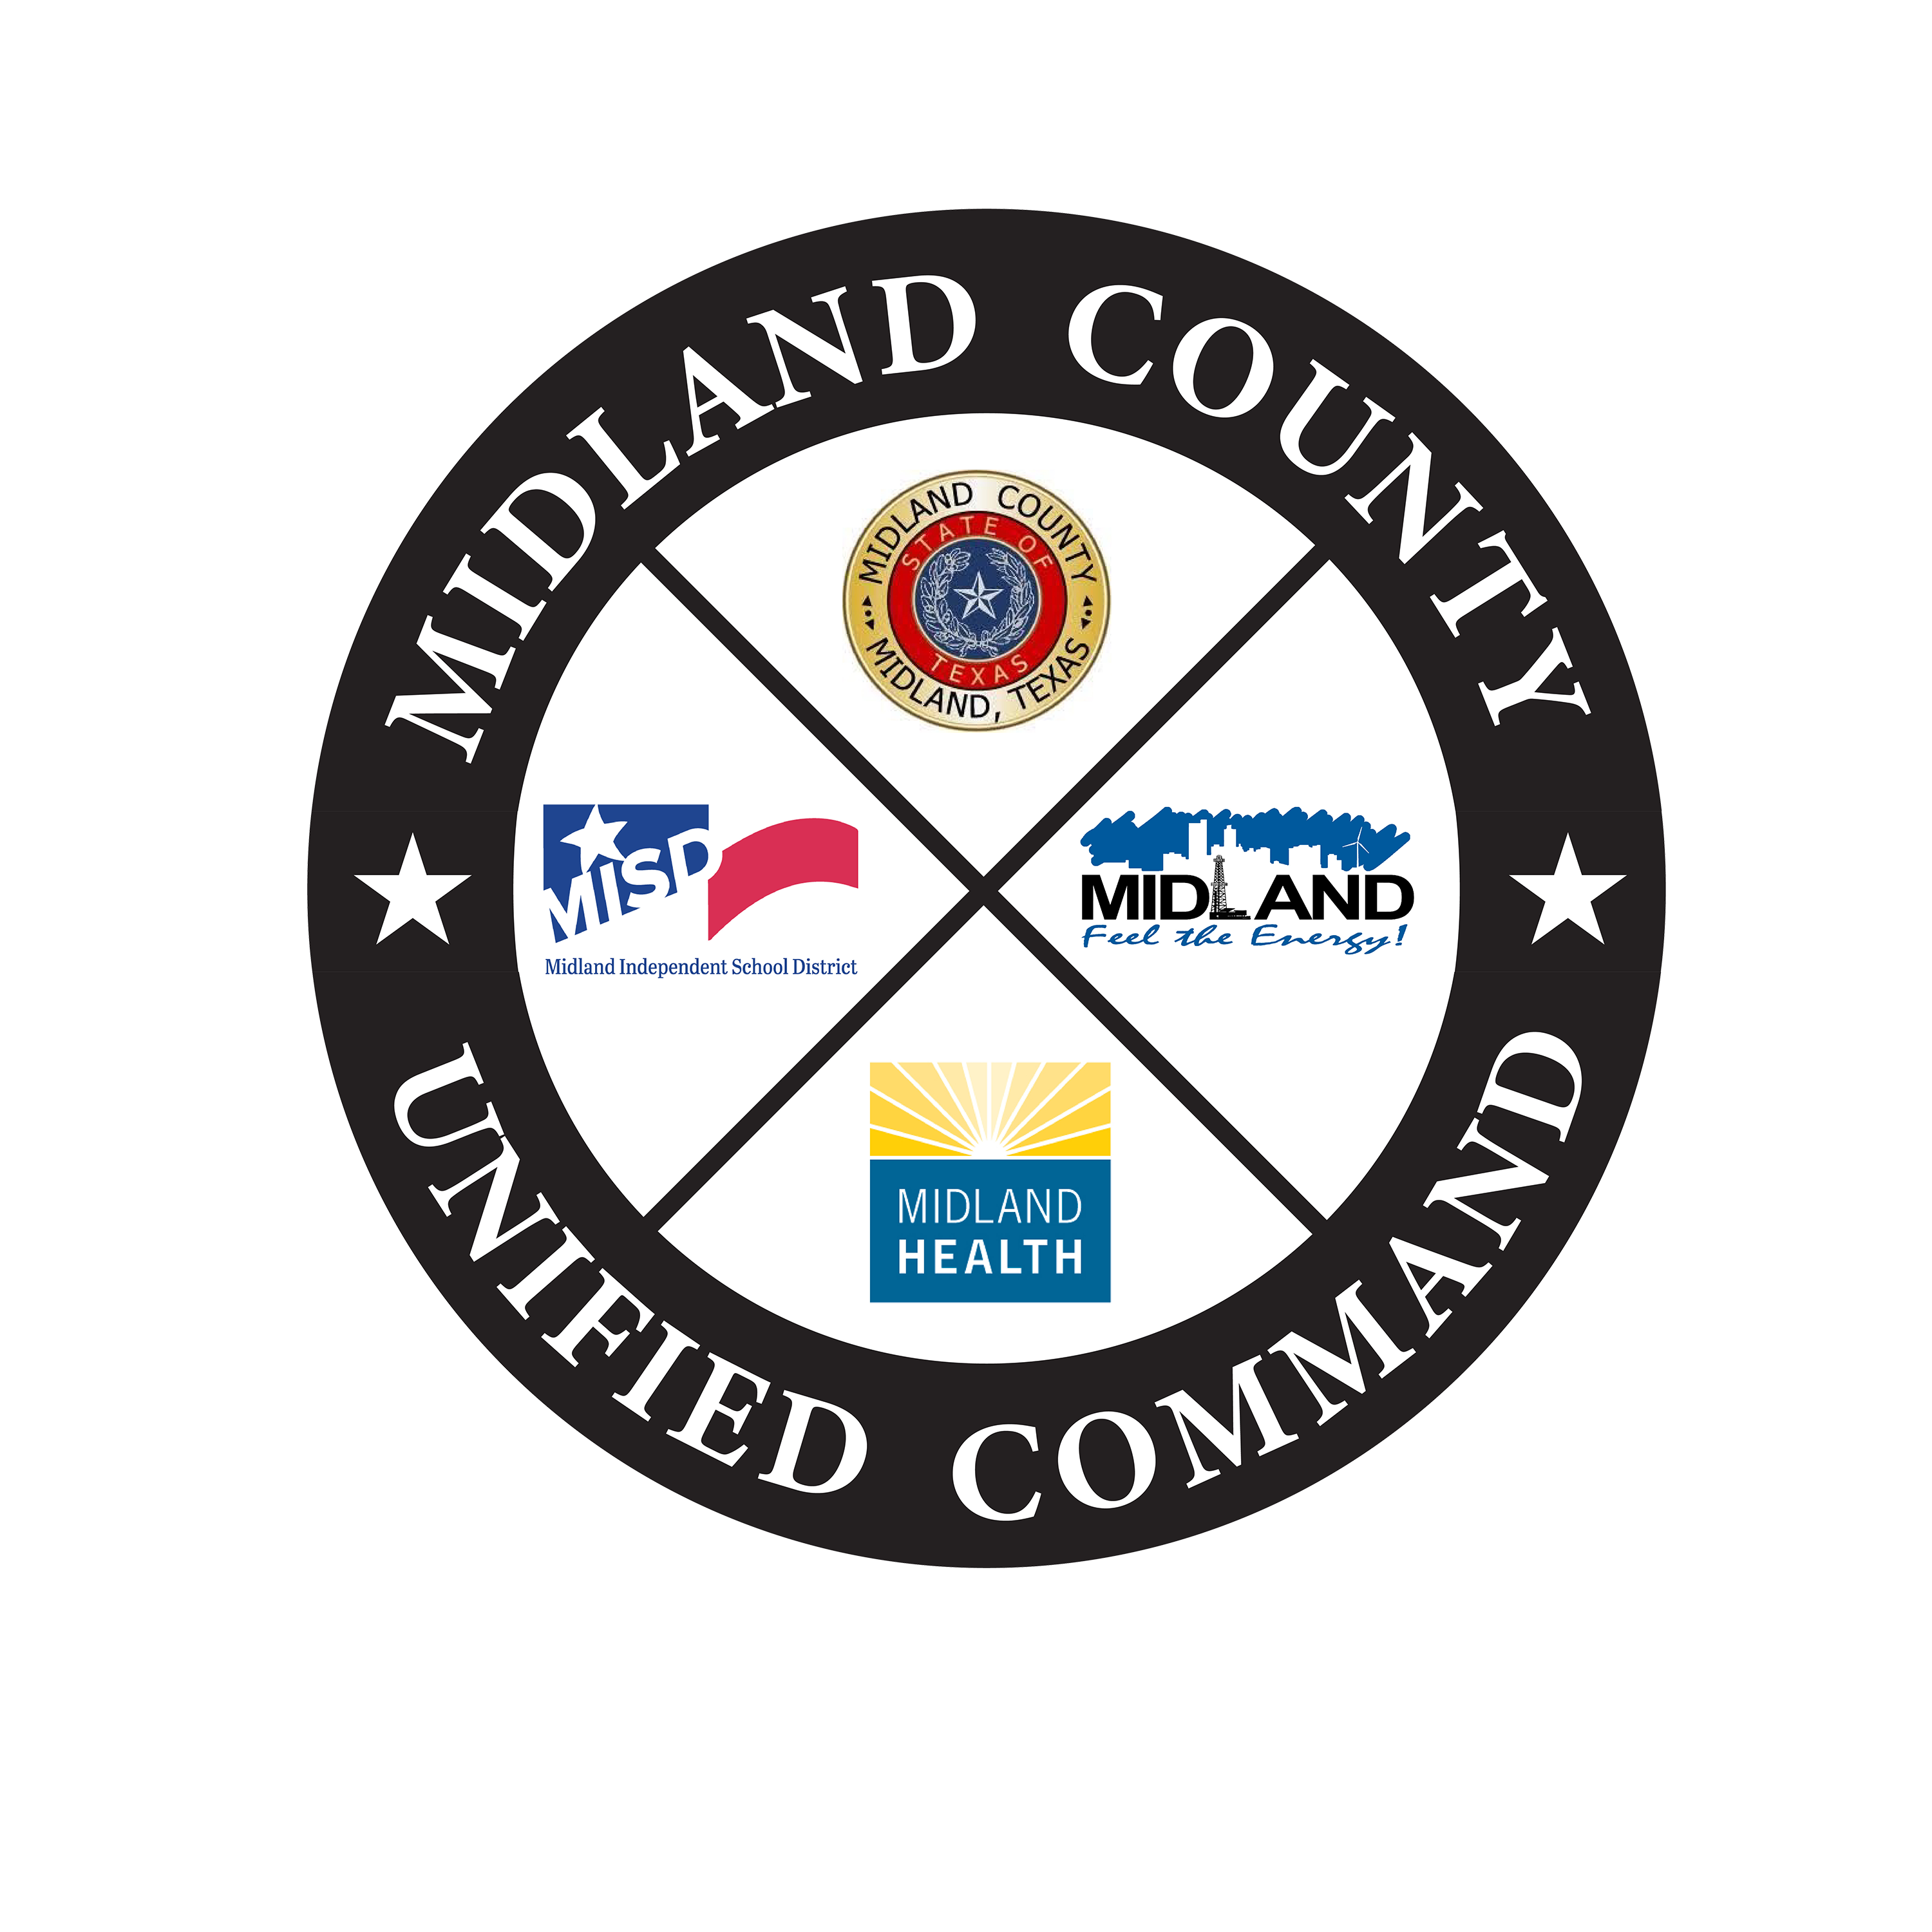 midland country unified command